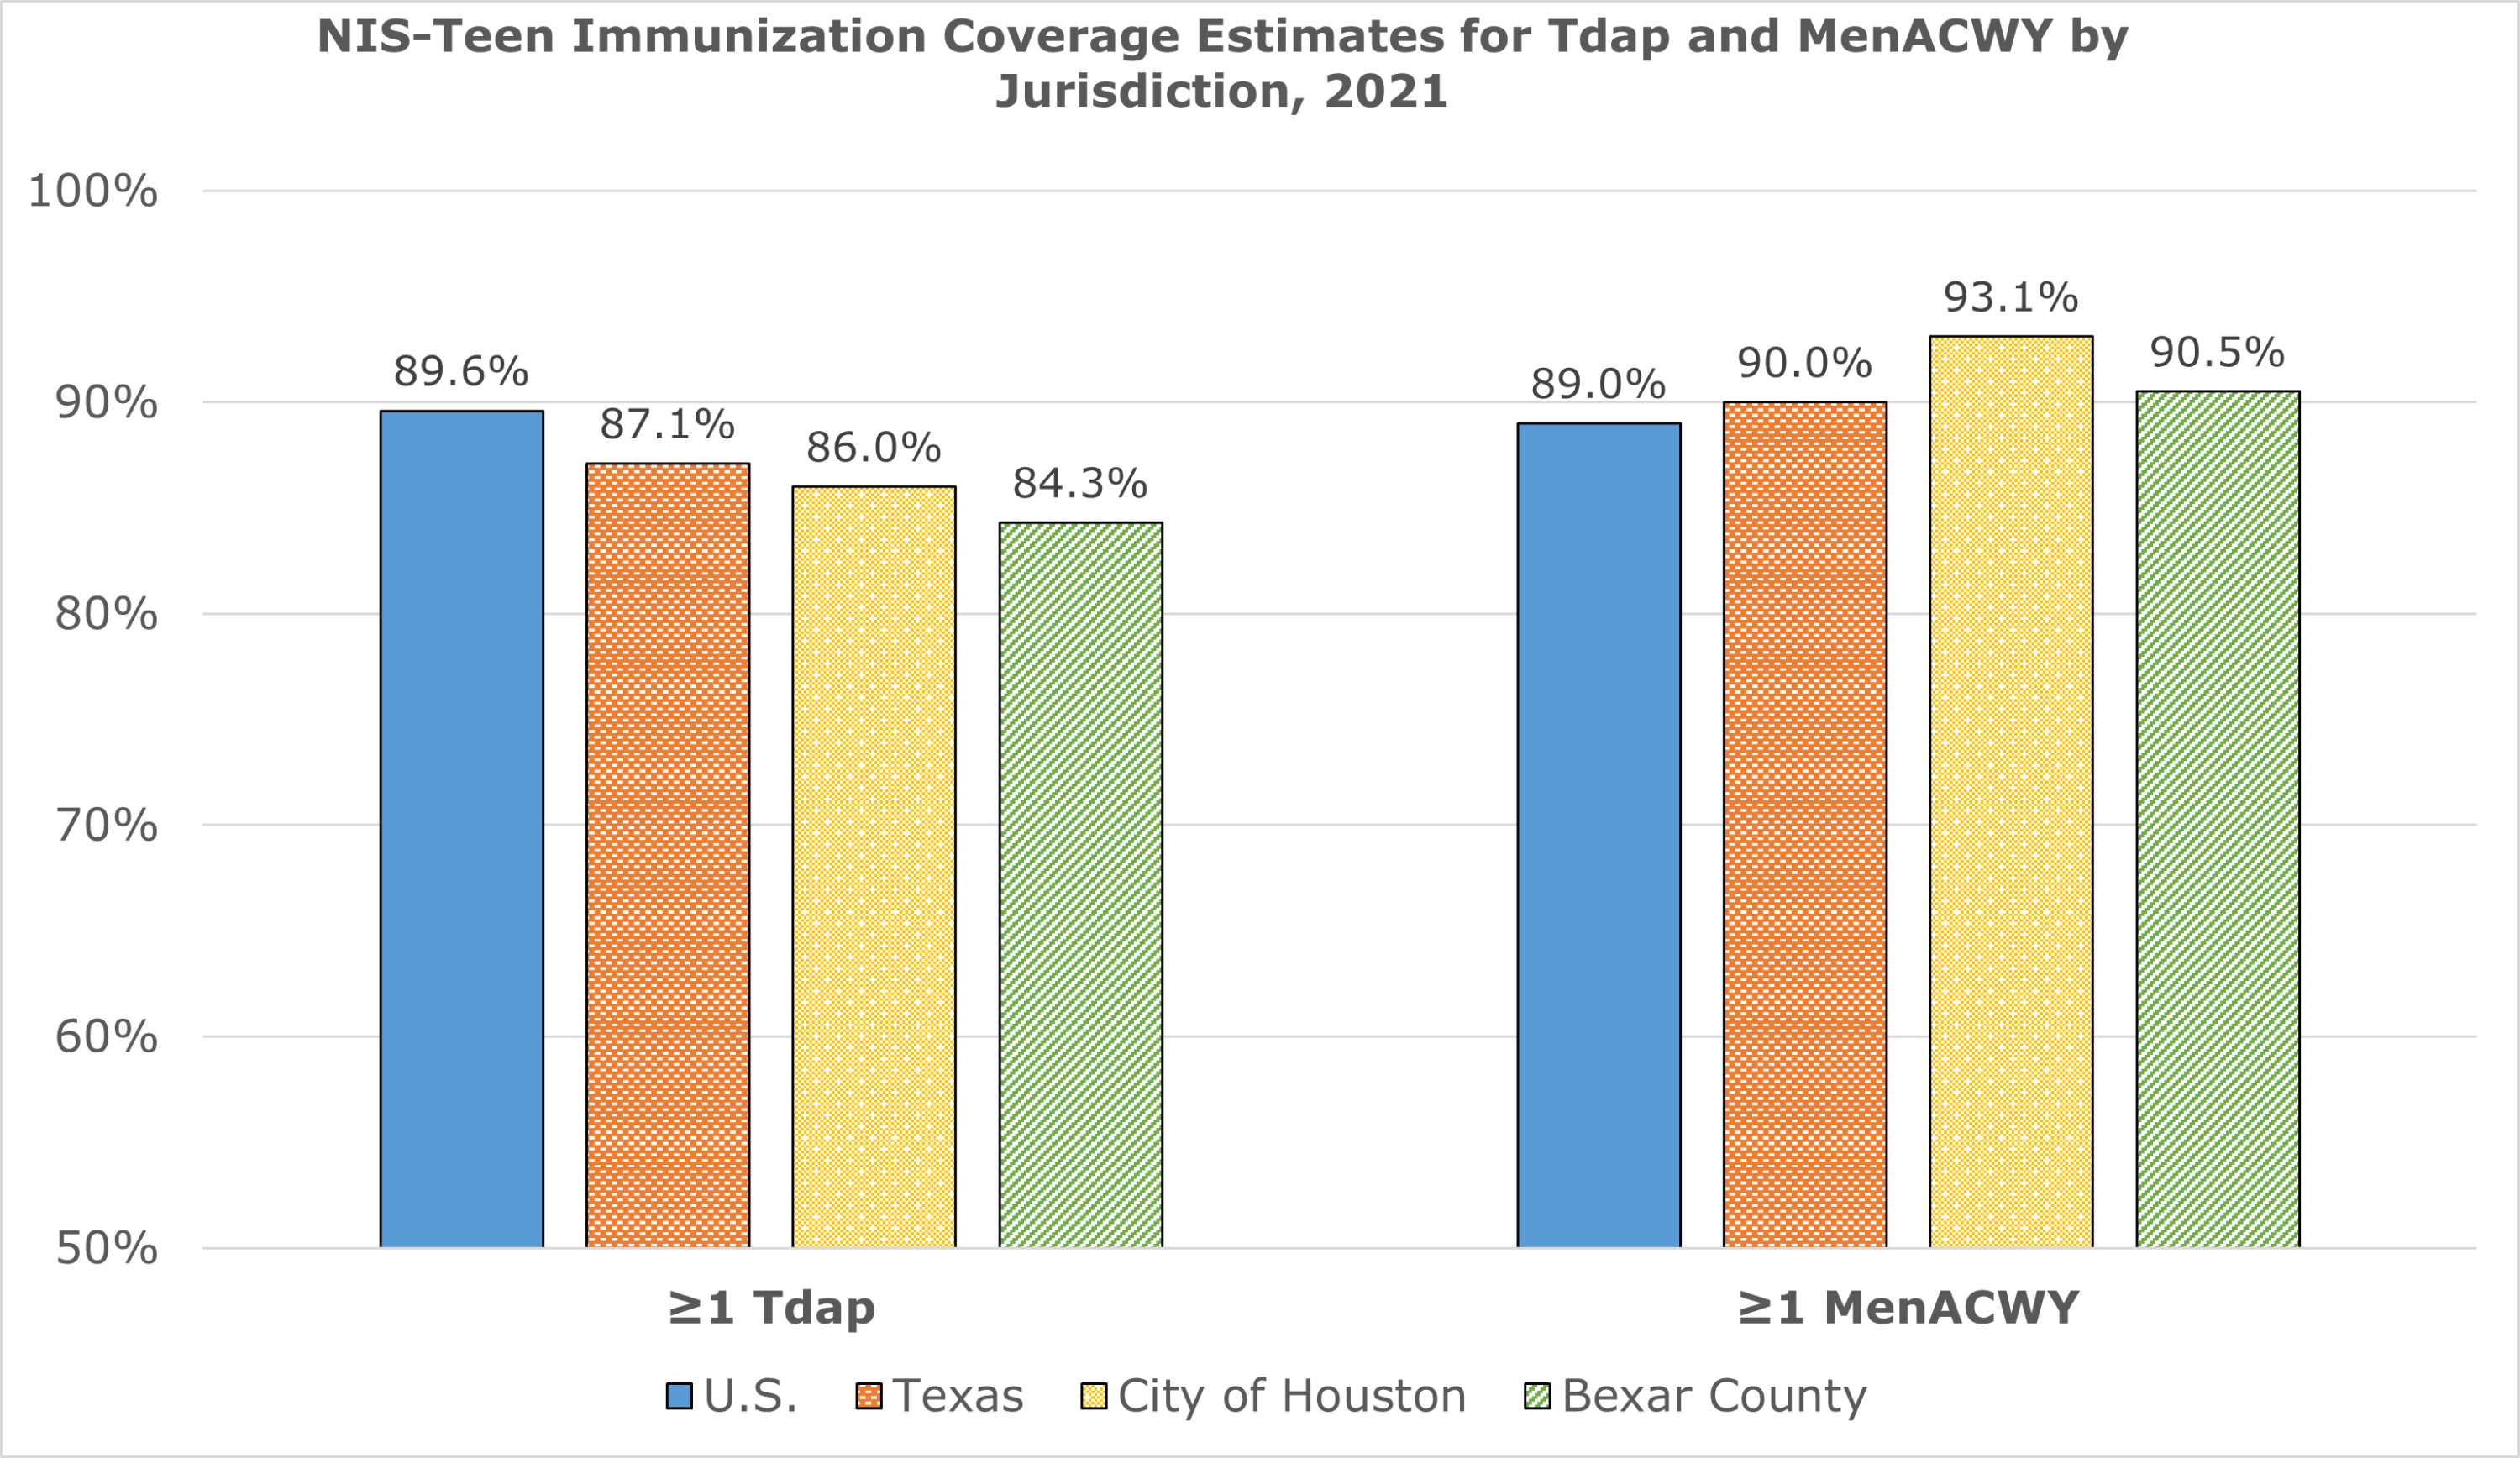 "NIS-Teen Immunization Coverage Estimates for Tdap and MenACWY by Jurisdiction 2021"